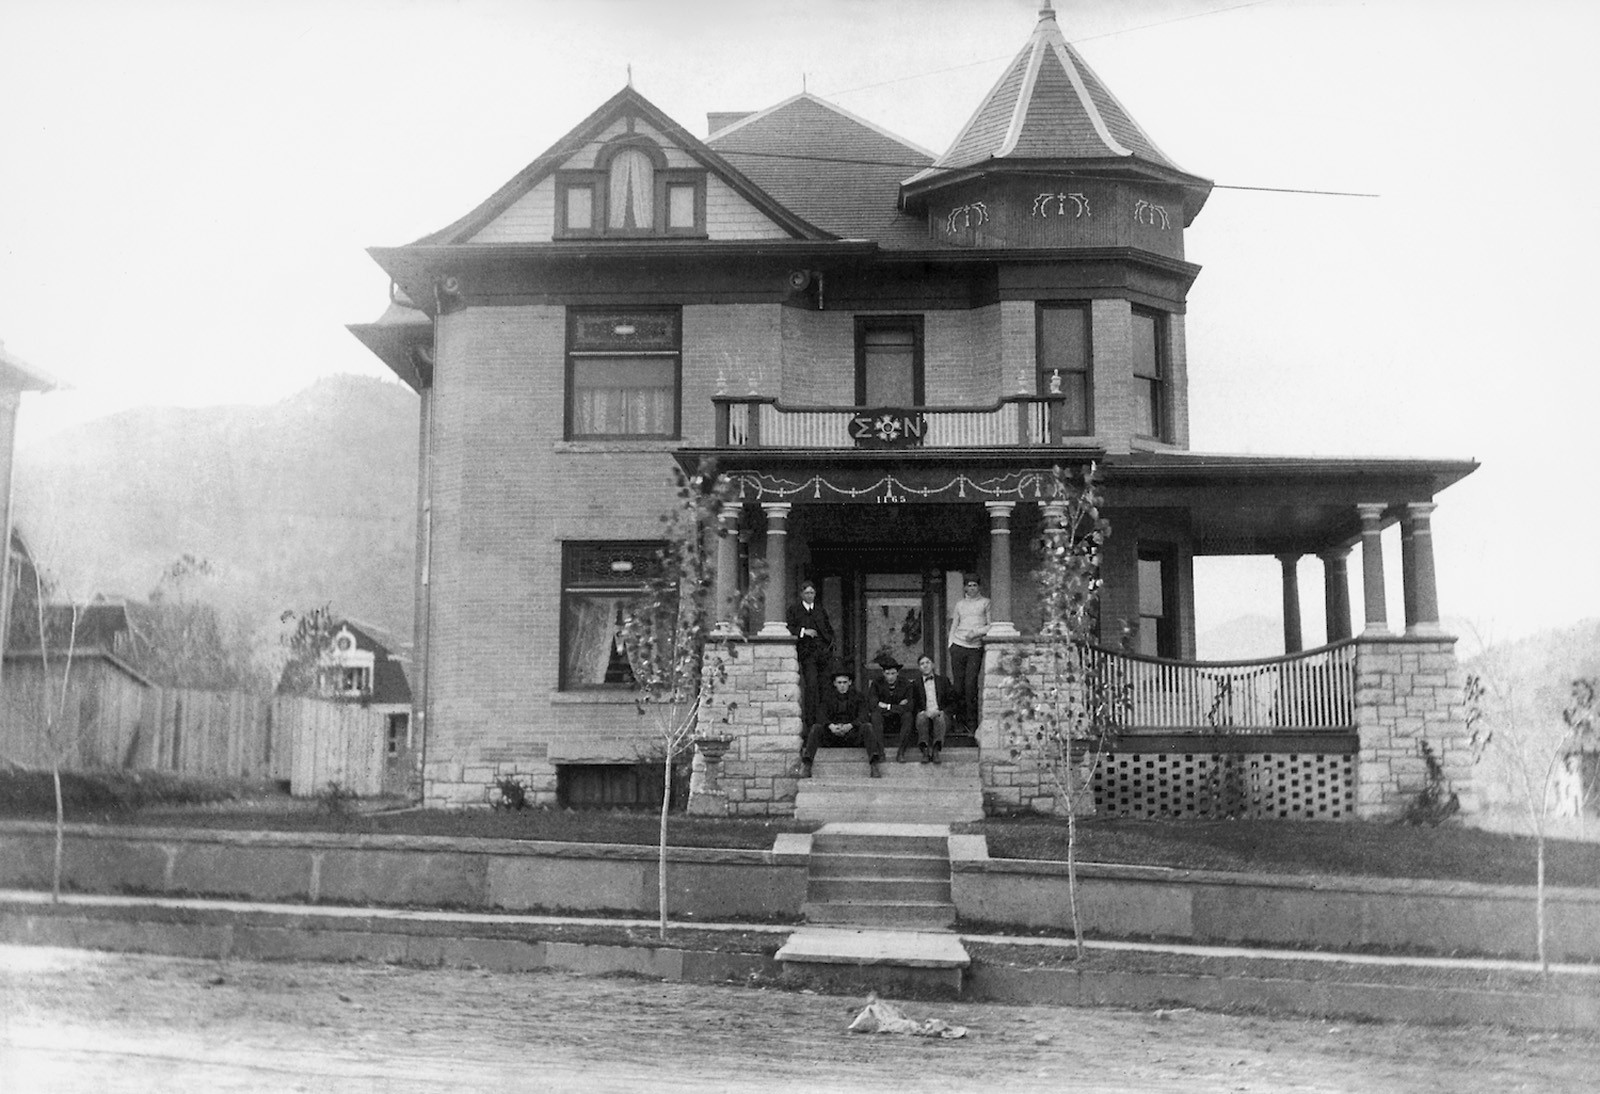 Black and white photo of Sigma Nu in the 1900s before becoming The Sink on the hill in boulder